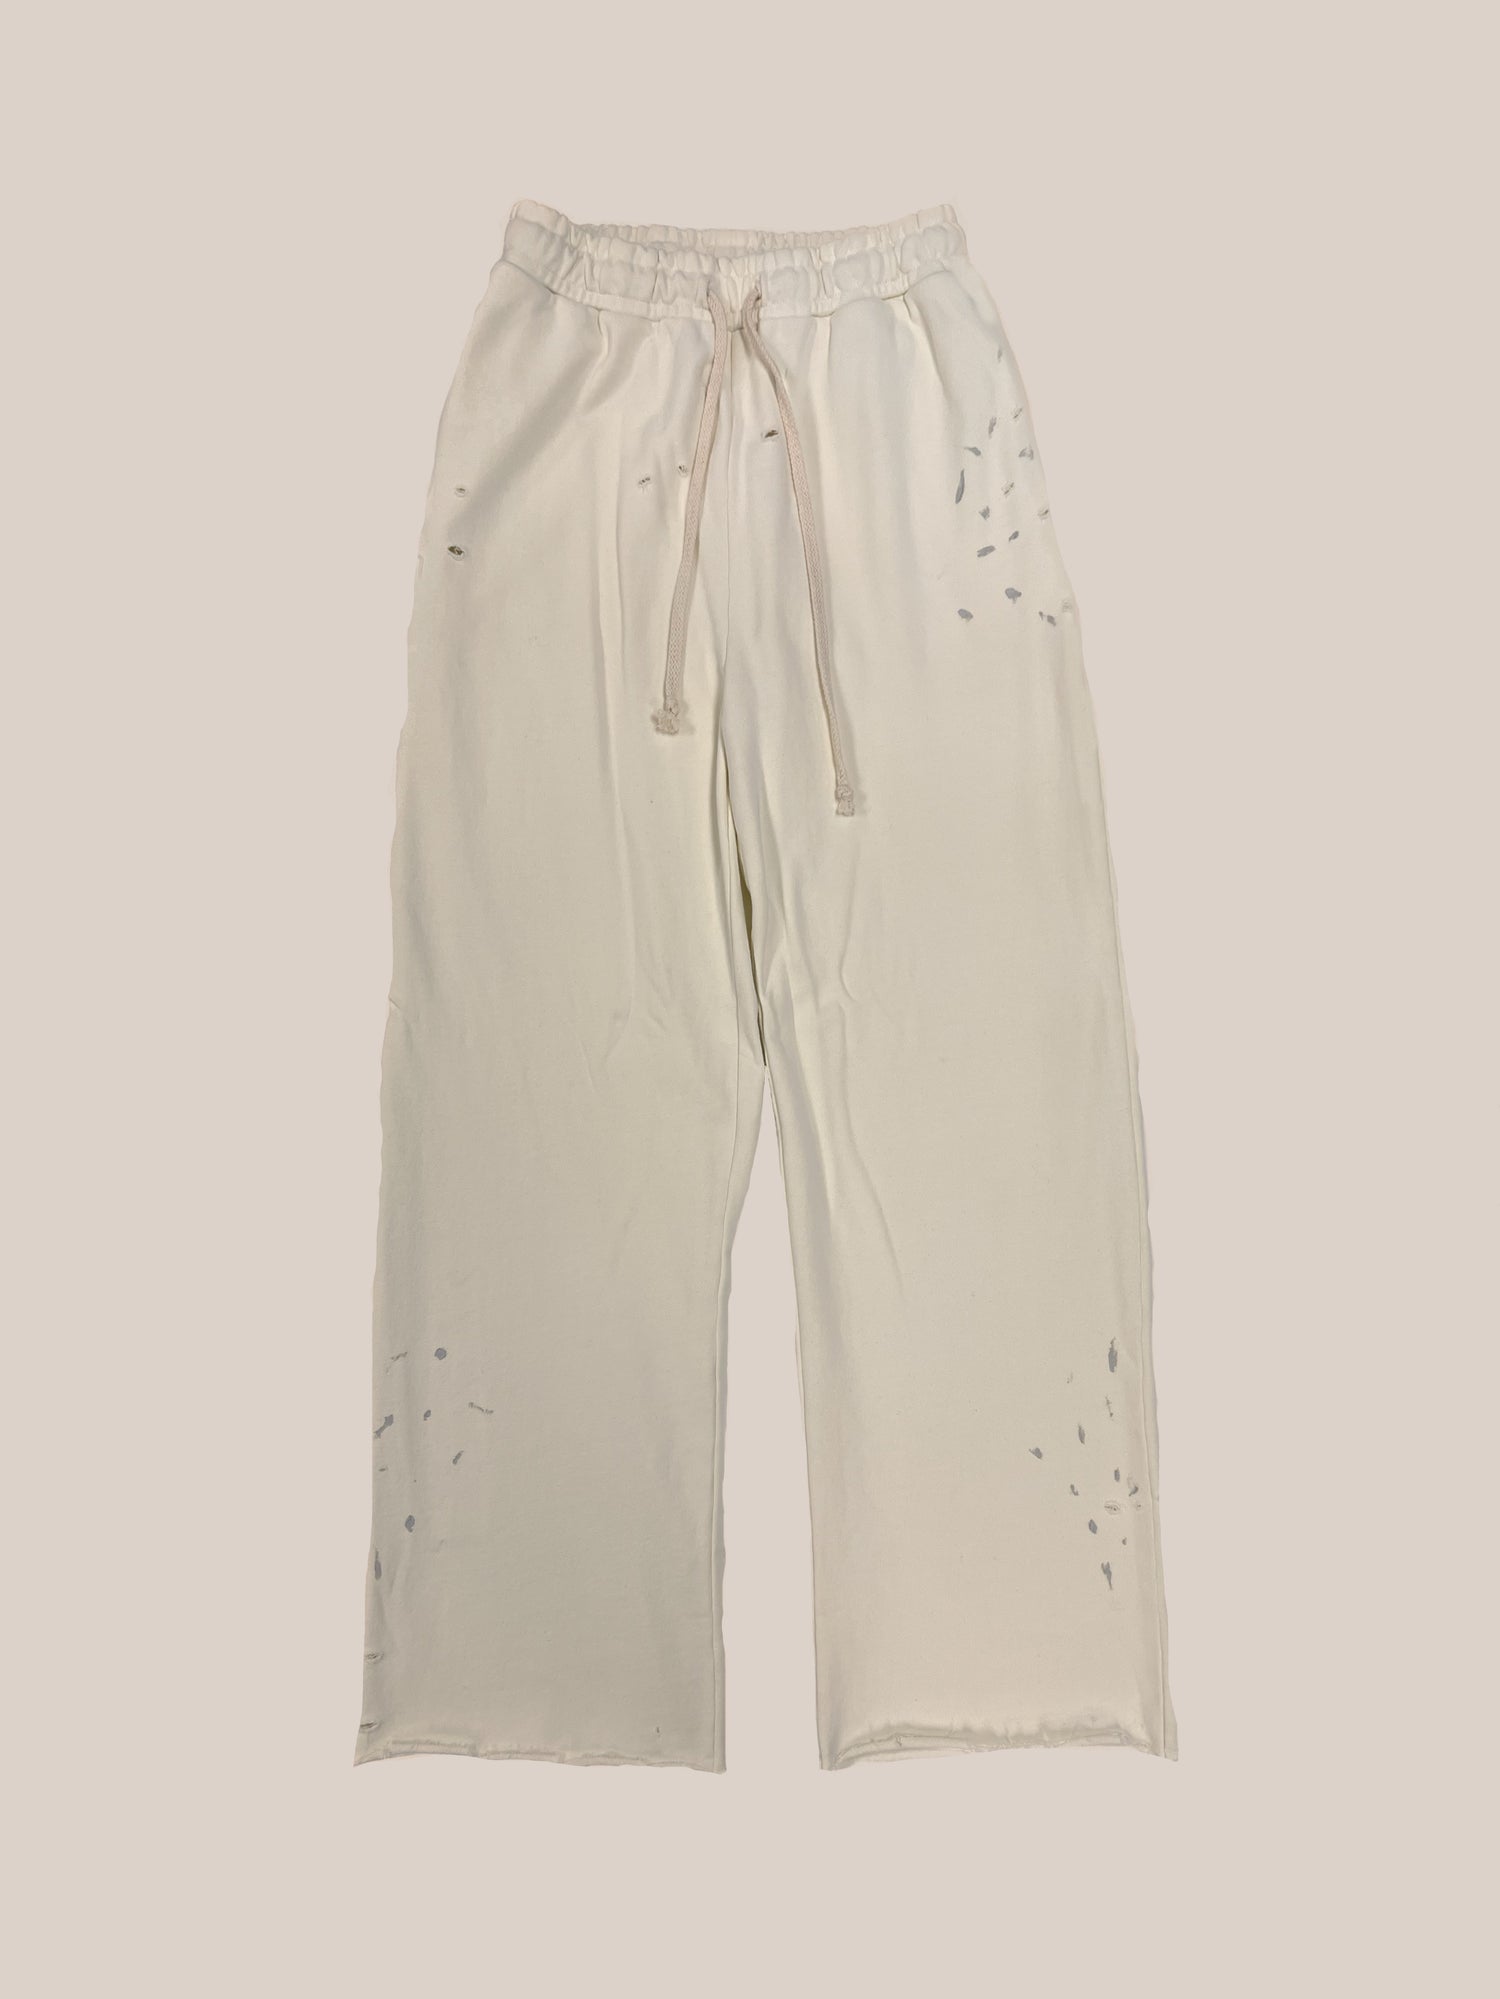 A pair of Sample 35 cream-colored, drawstring lounge pants with distressing and holes by Profound.